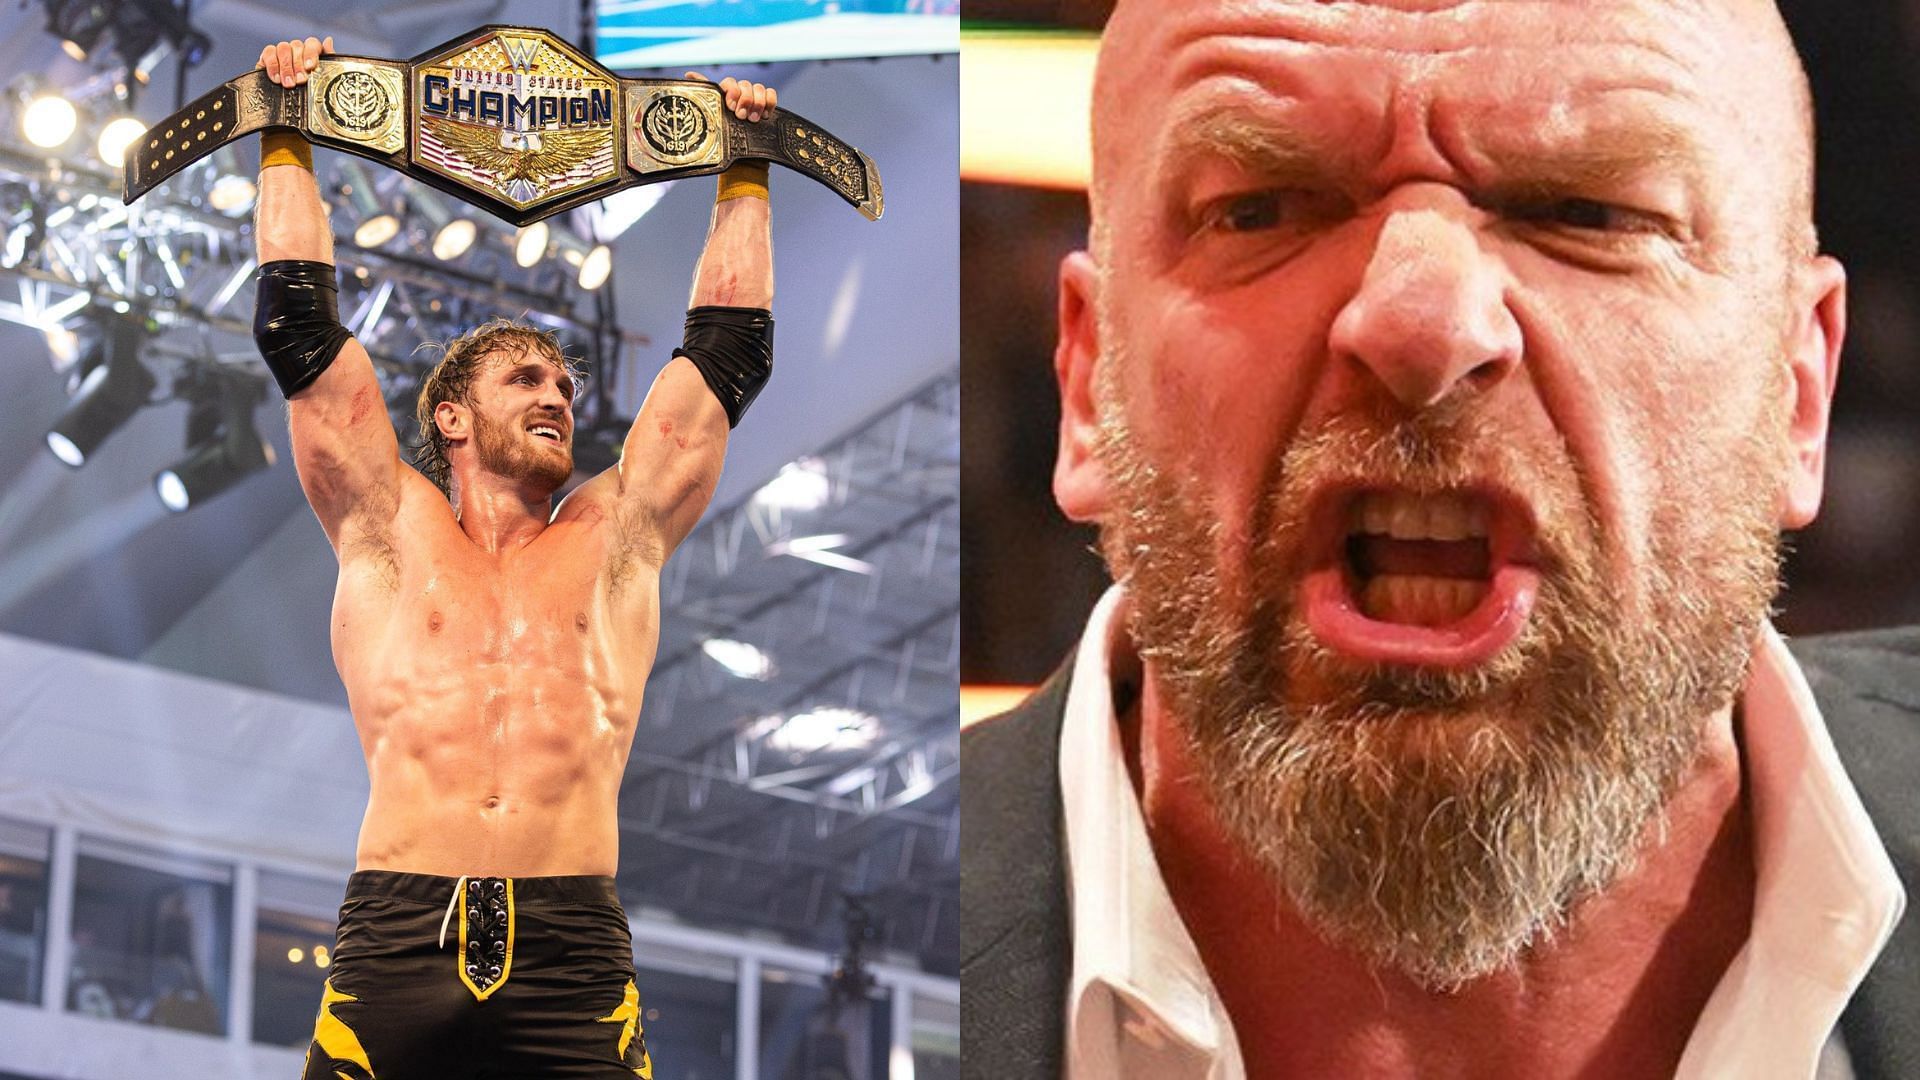 Logan Paul received a message from Triple H on social media after Crown Jewel